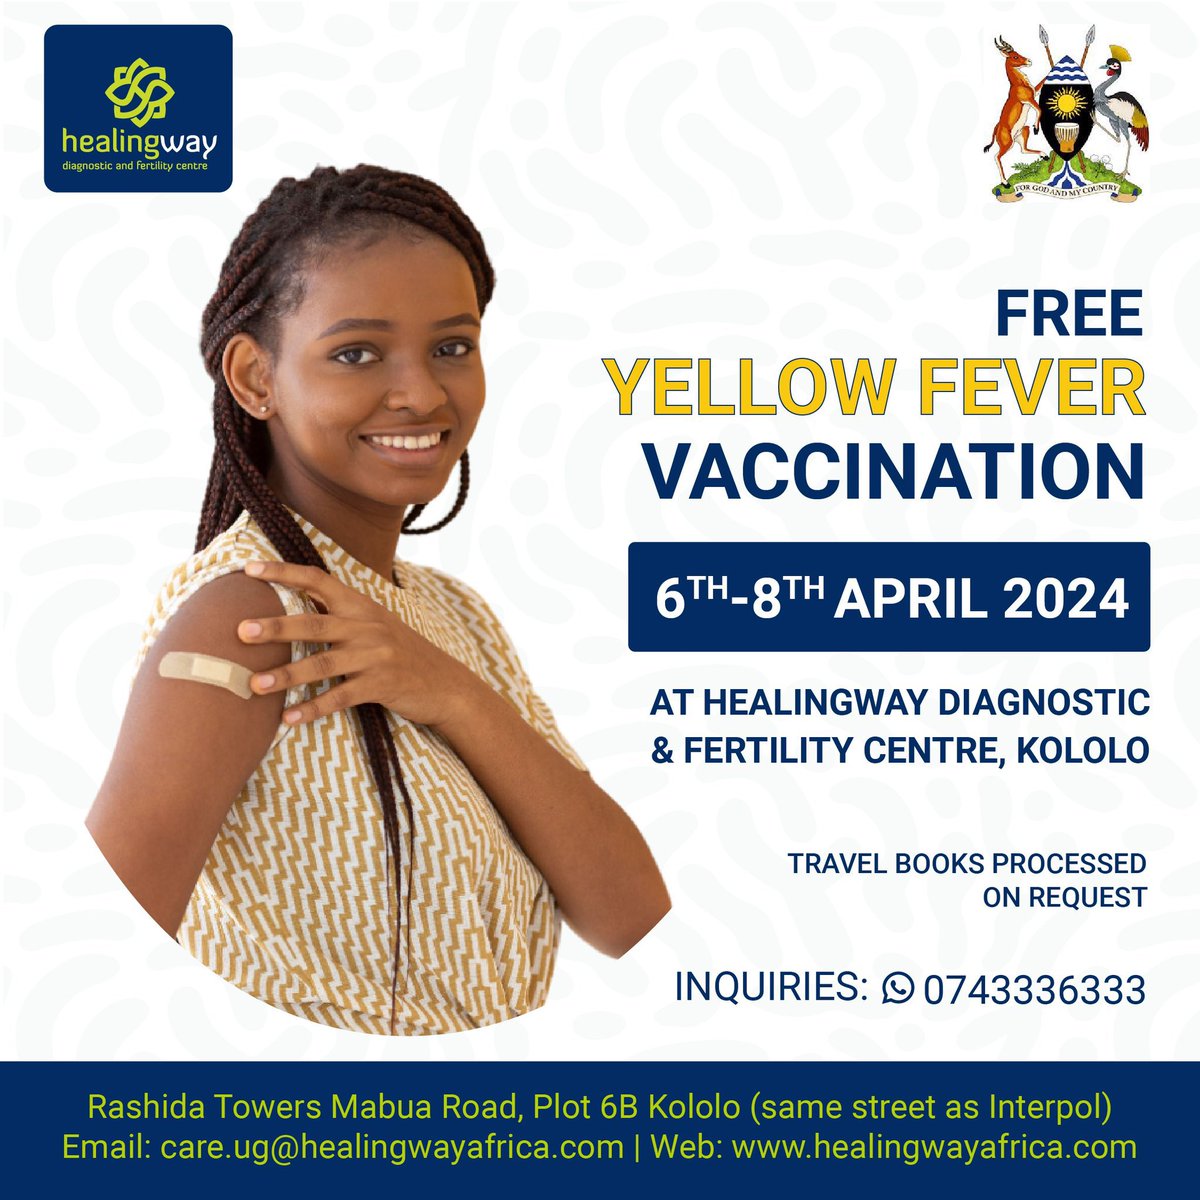 Healingway diagnostic center in Kololo will be doing free yellow fever vaccination from the 6-8th of April starting tomorrow. Don’t miss out guys!!

#YellowFeverFreeUG